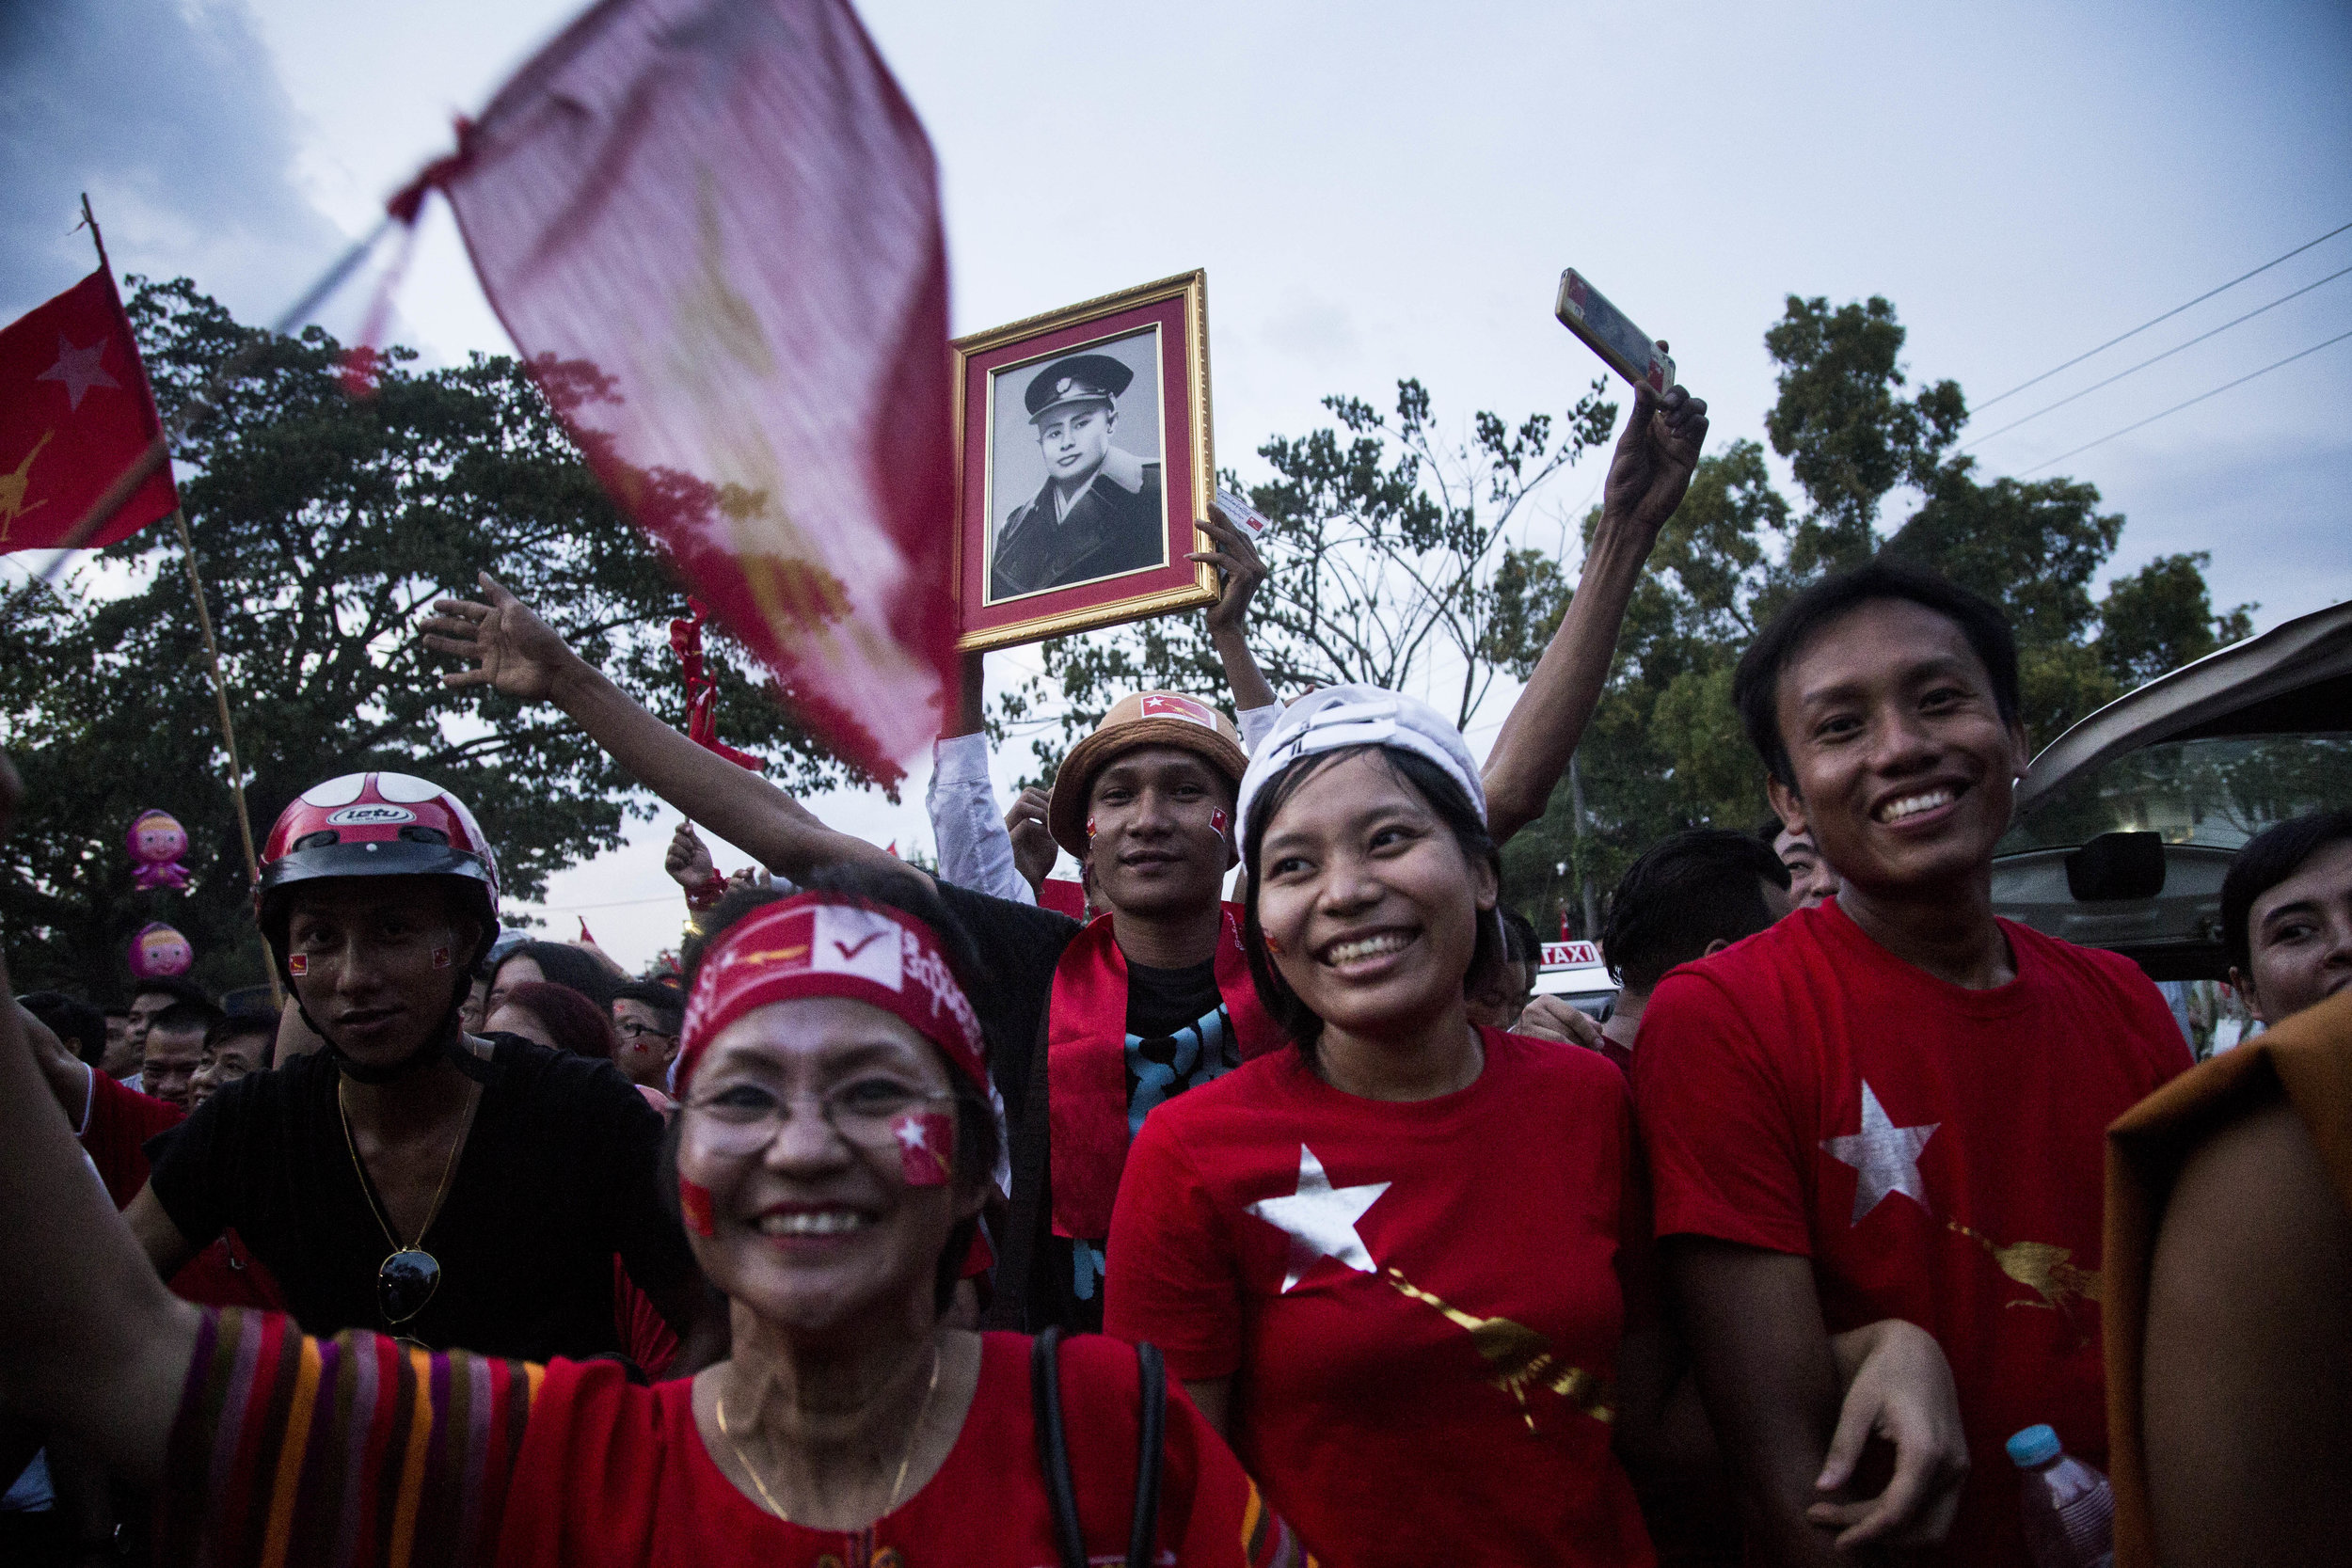  Tens of thousands of NLD supporters showed up at Daw Aung San Suu Kyi’s rally at Thuwanna Pagoda on November 1, 2015. Photo by Ann Wang 